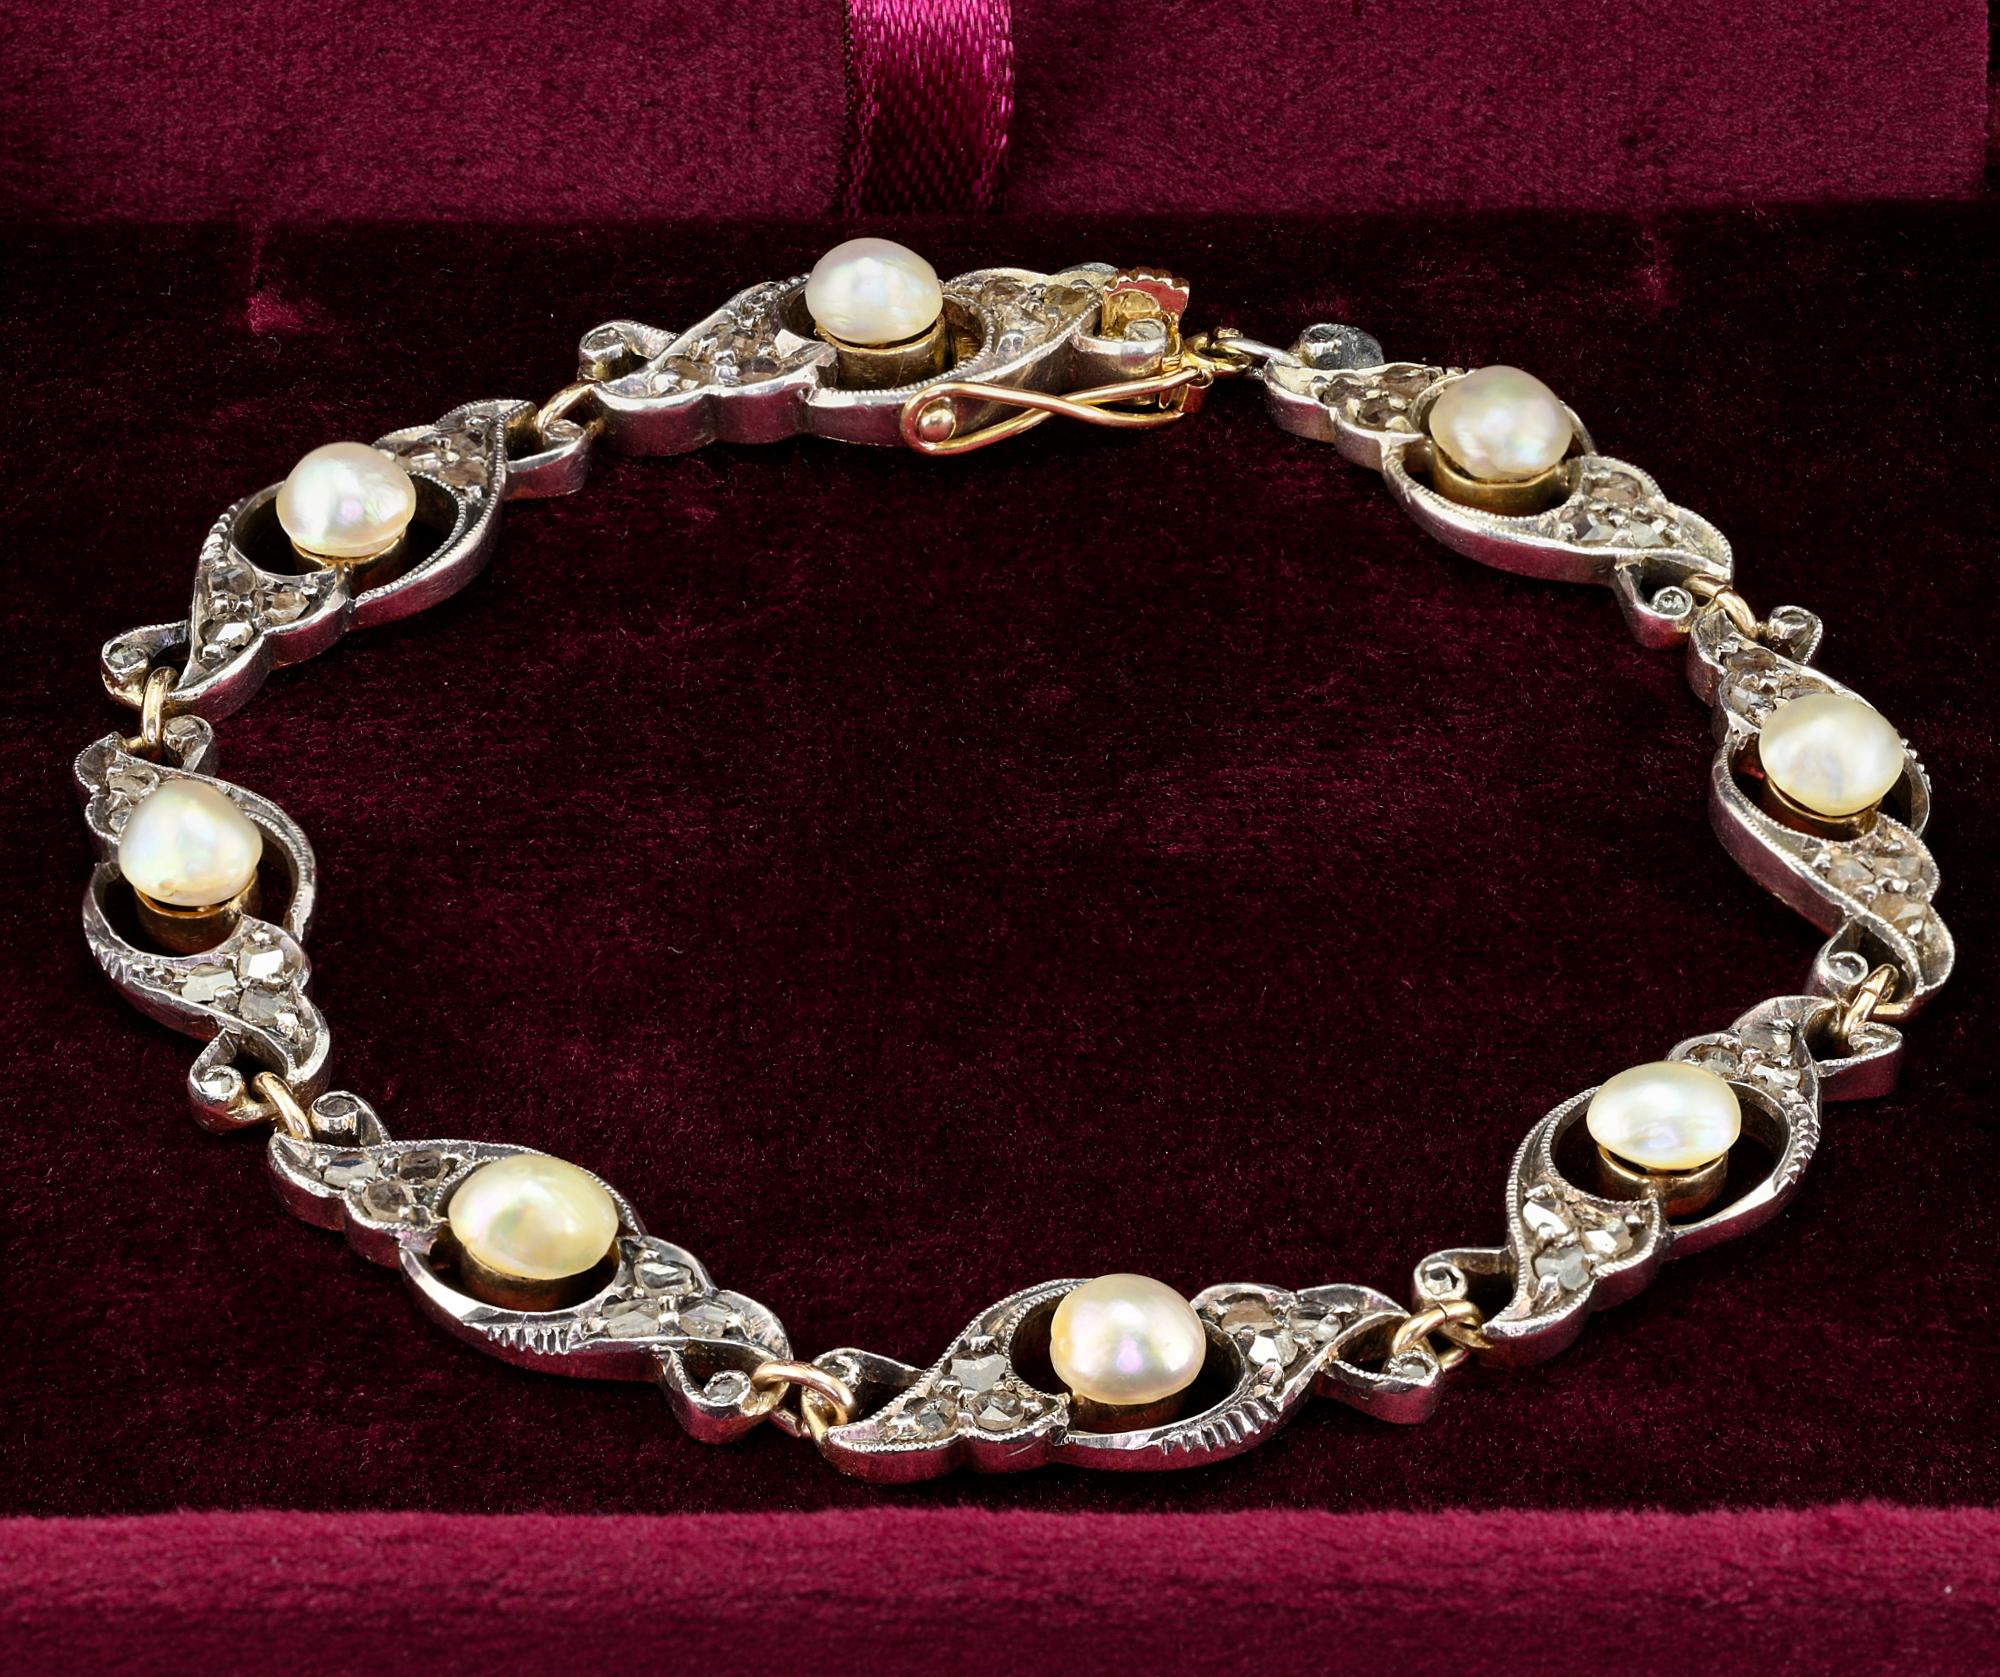 This charming antique bracelet is Edwardian period, circa1905
Hand crafted of solid 18 KT yellow gold topped by silver
Charming scroll openwork link design typical of the era, surmounted by a selection of 8 natural not nucleated salt water Pearls